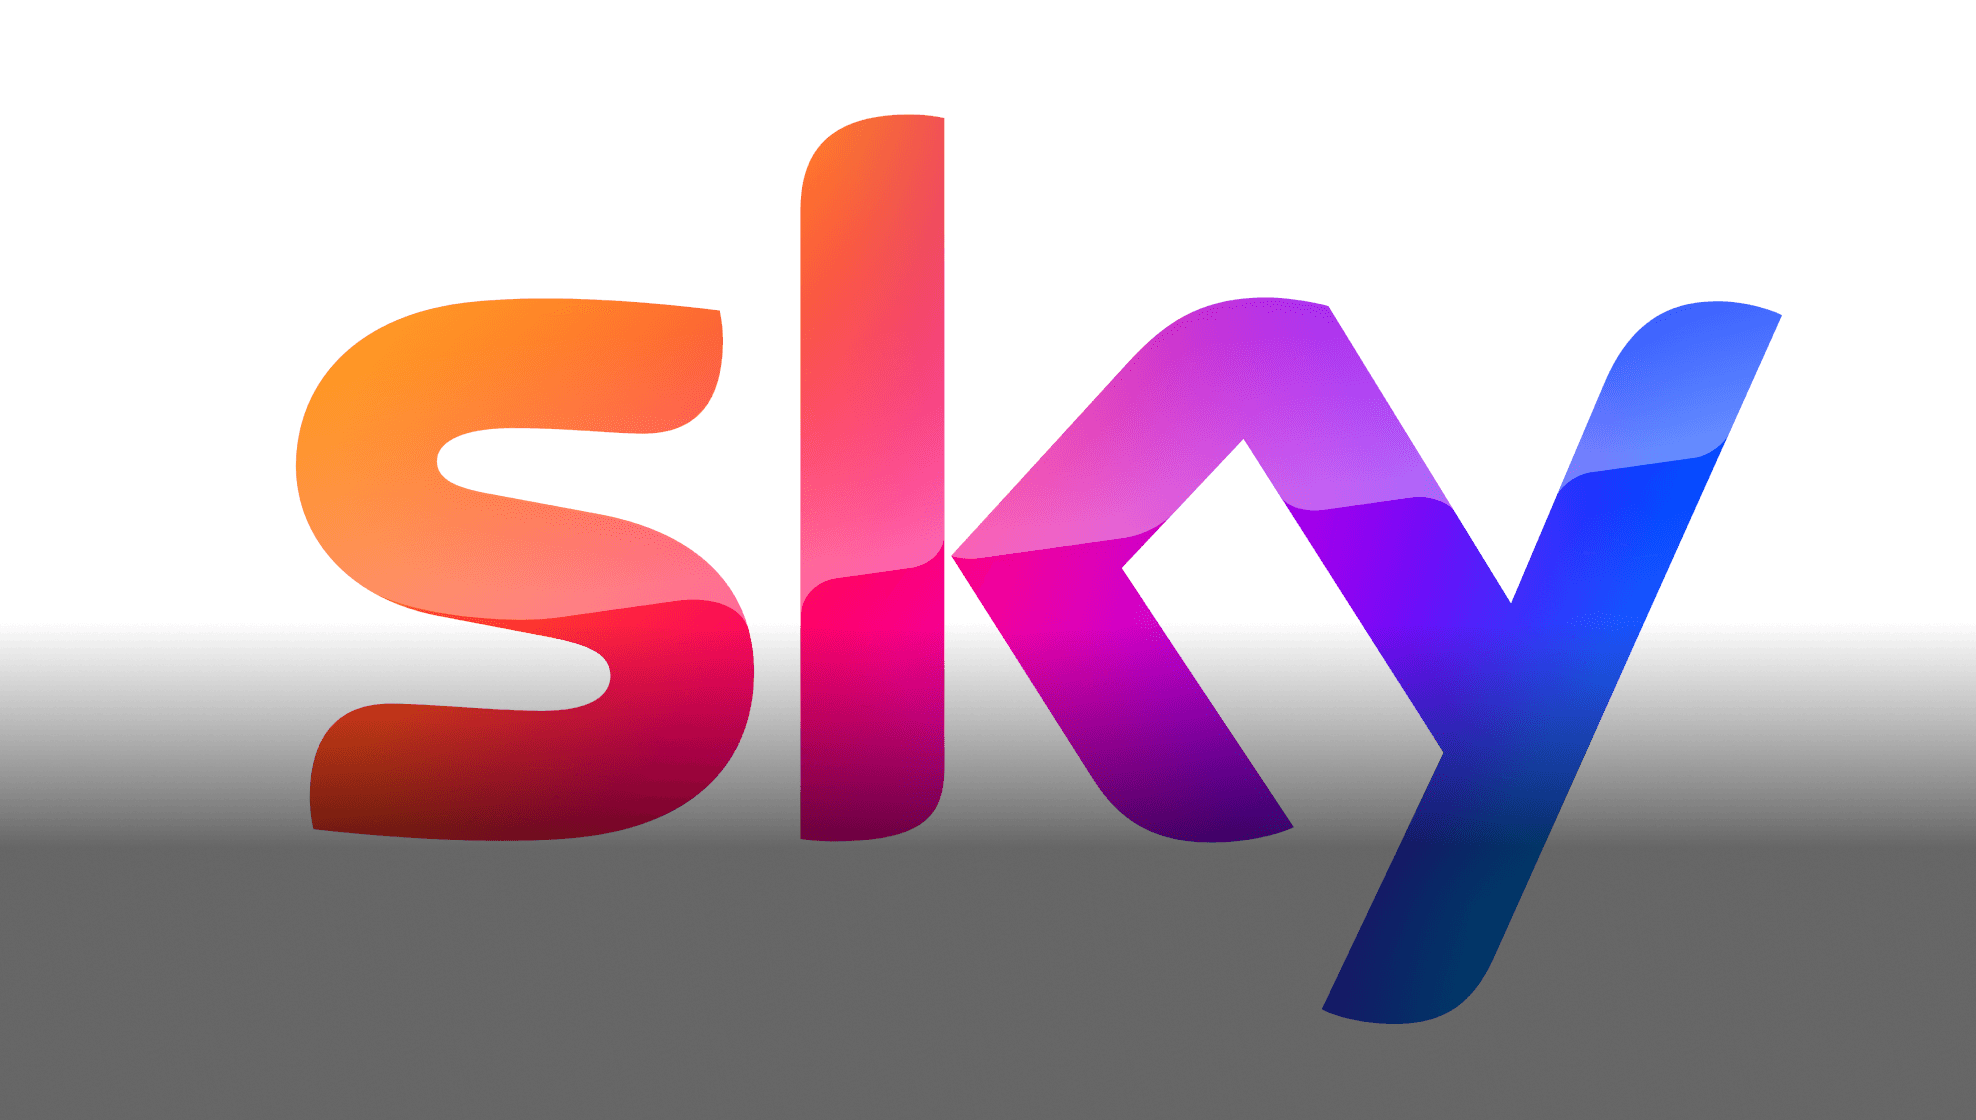 Image of a sky logo in orange, pink, purple and blue